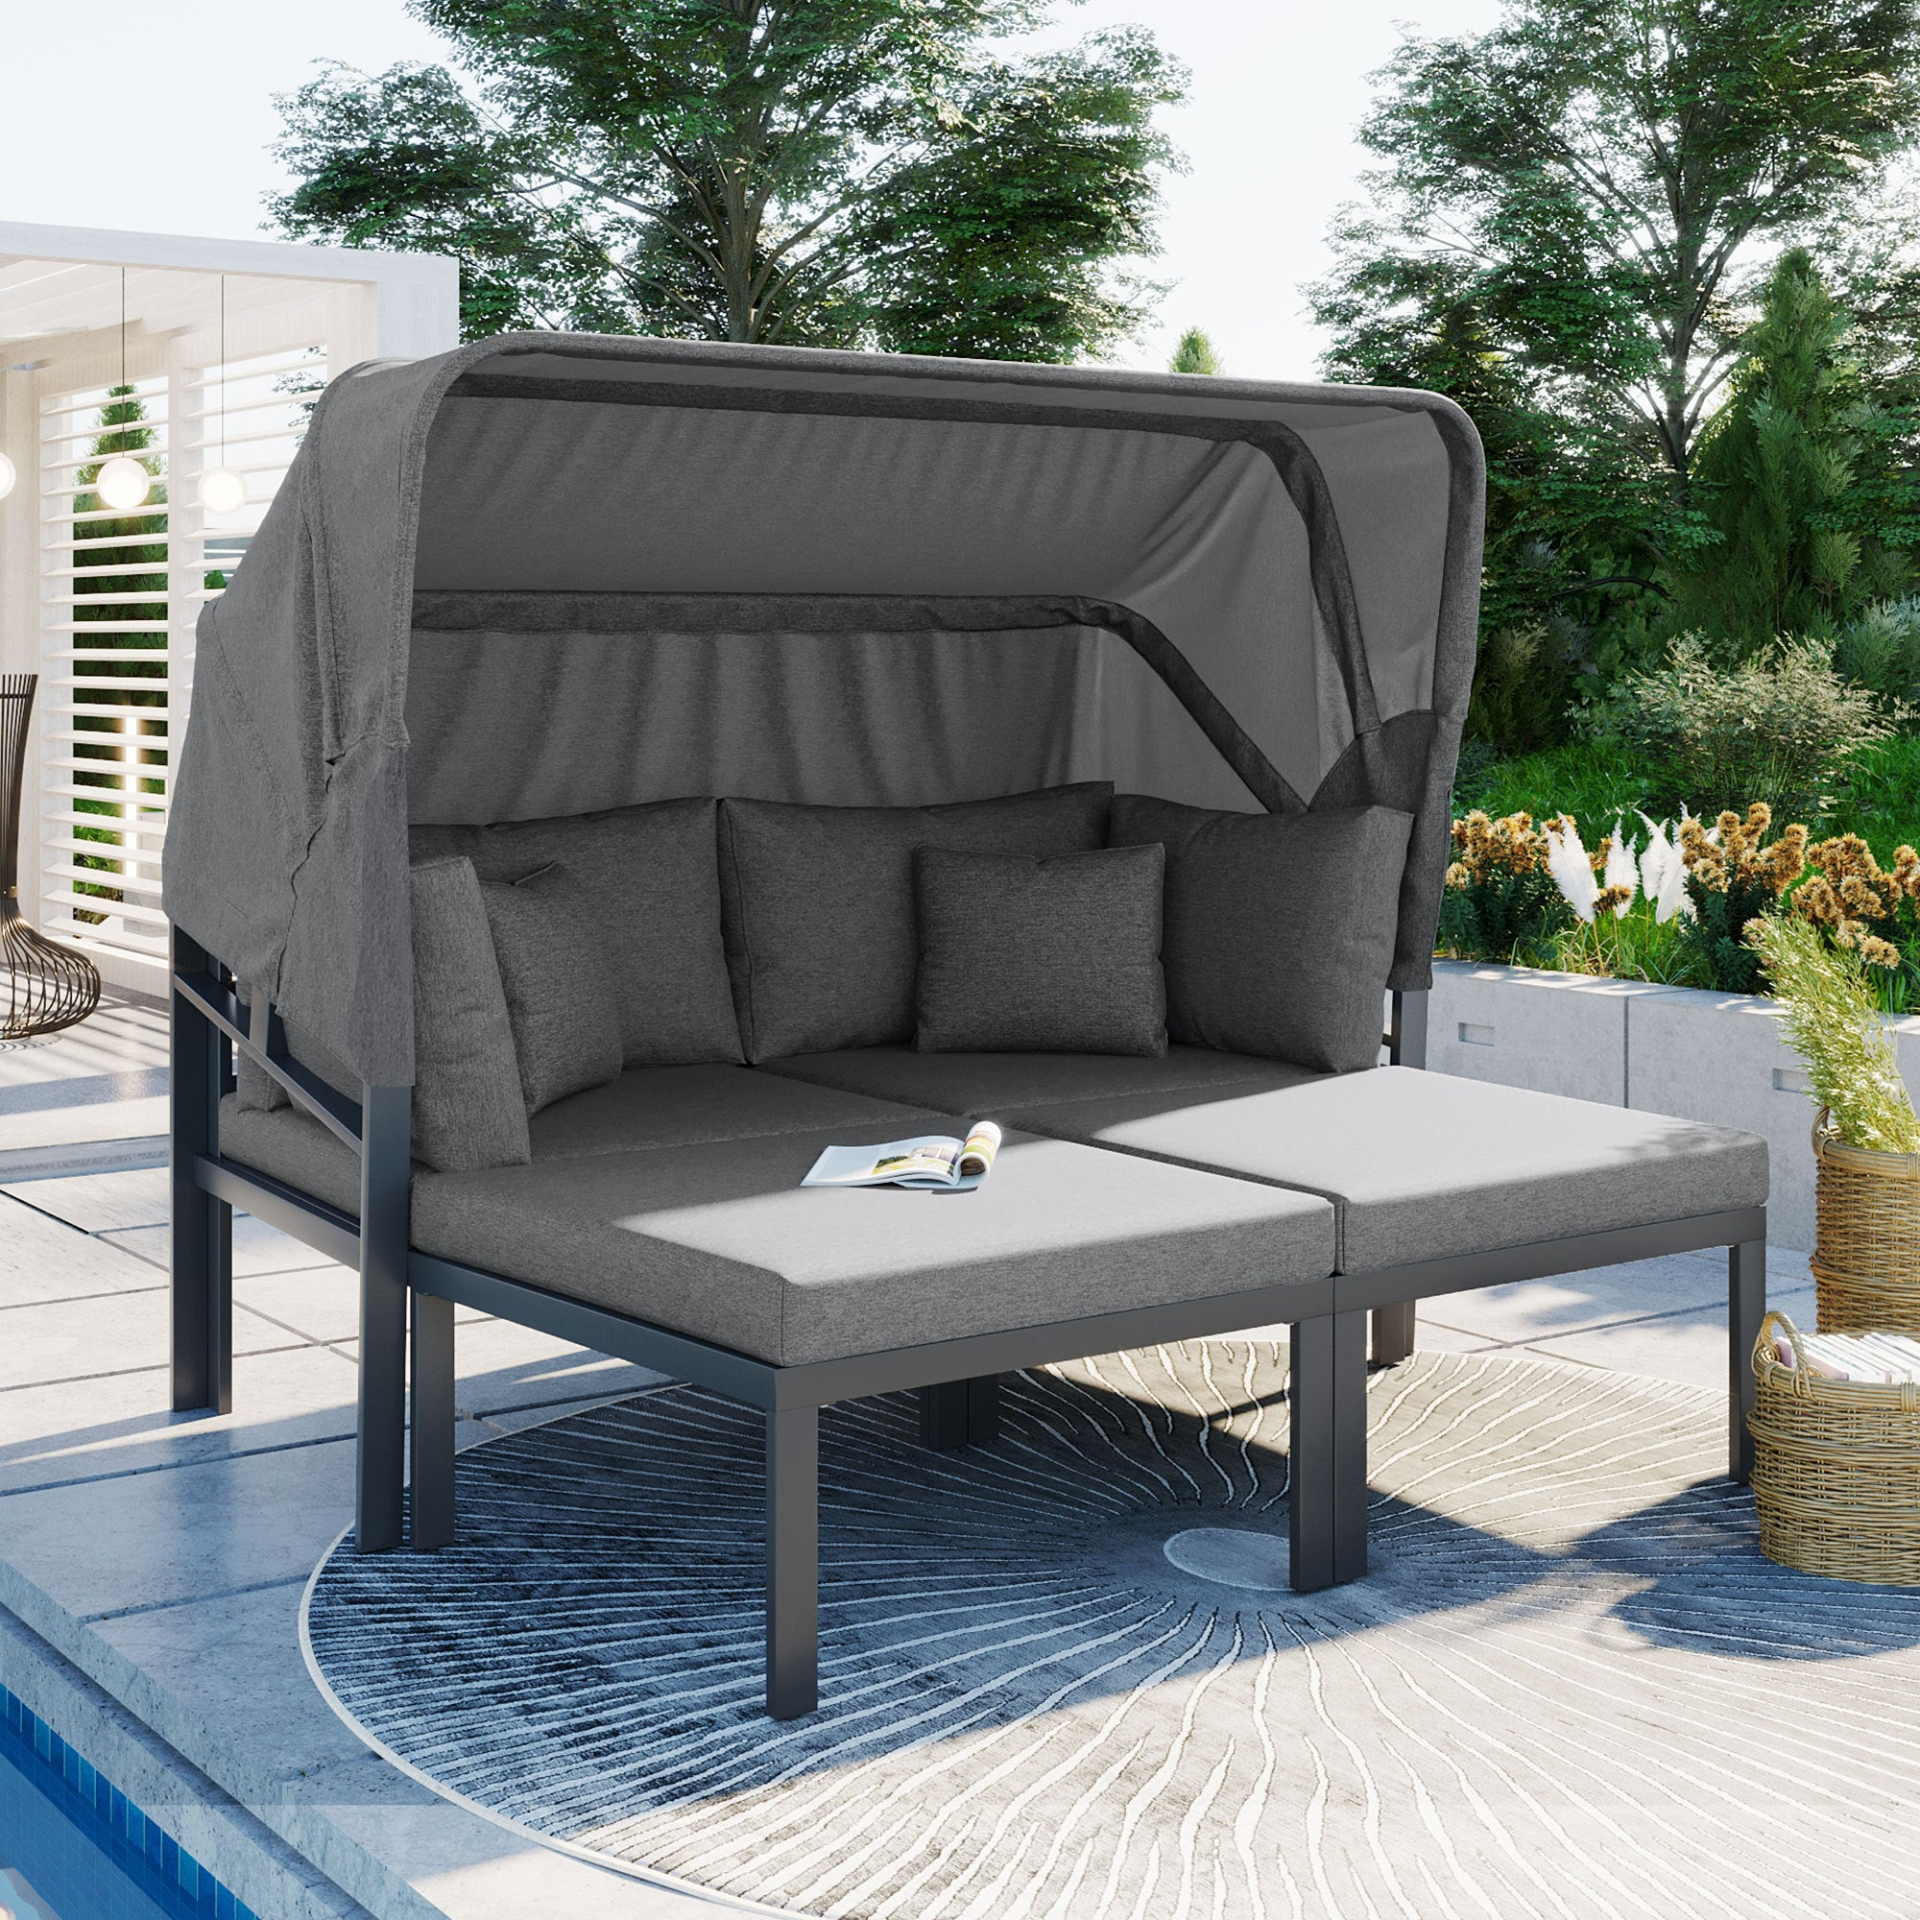 3-Piece Patio Daybed with Retractable Canopy Outdoor Metal Sectional Sofa Set Sun Lounger with Cushions for Backyard, Porch, Poolside,Grey